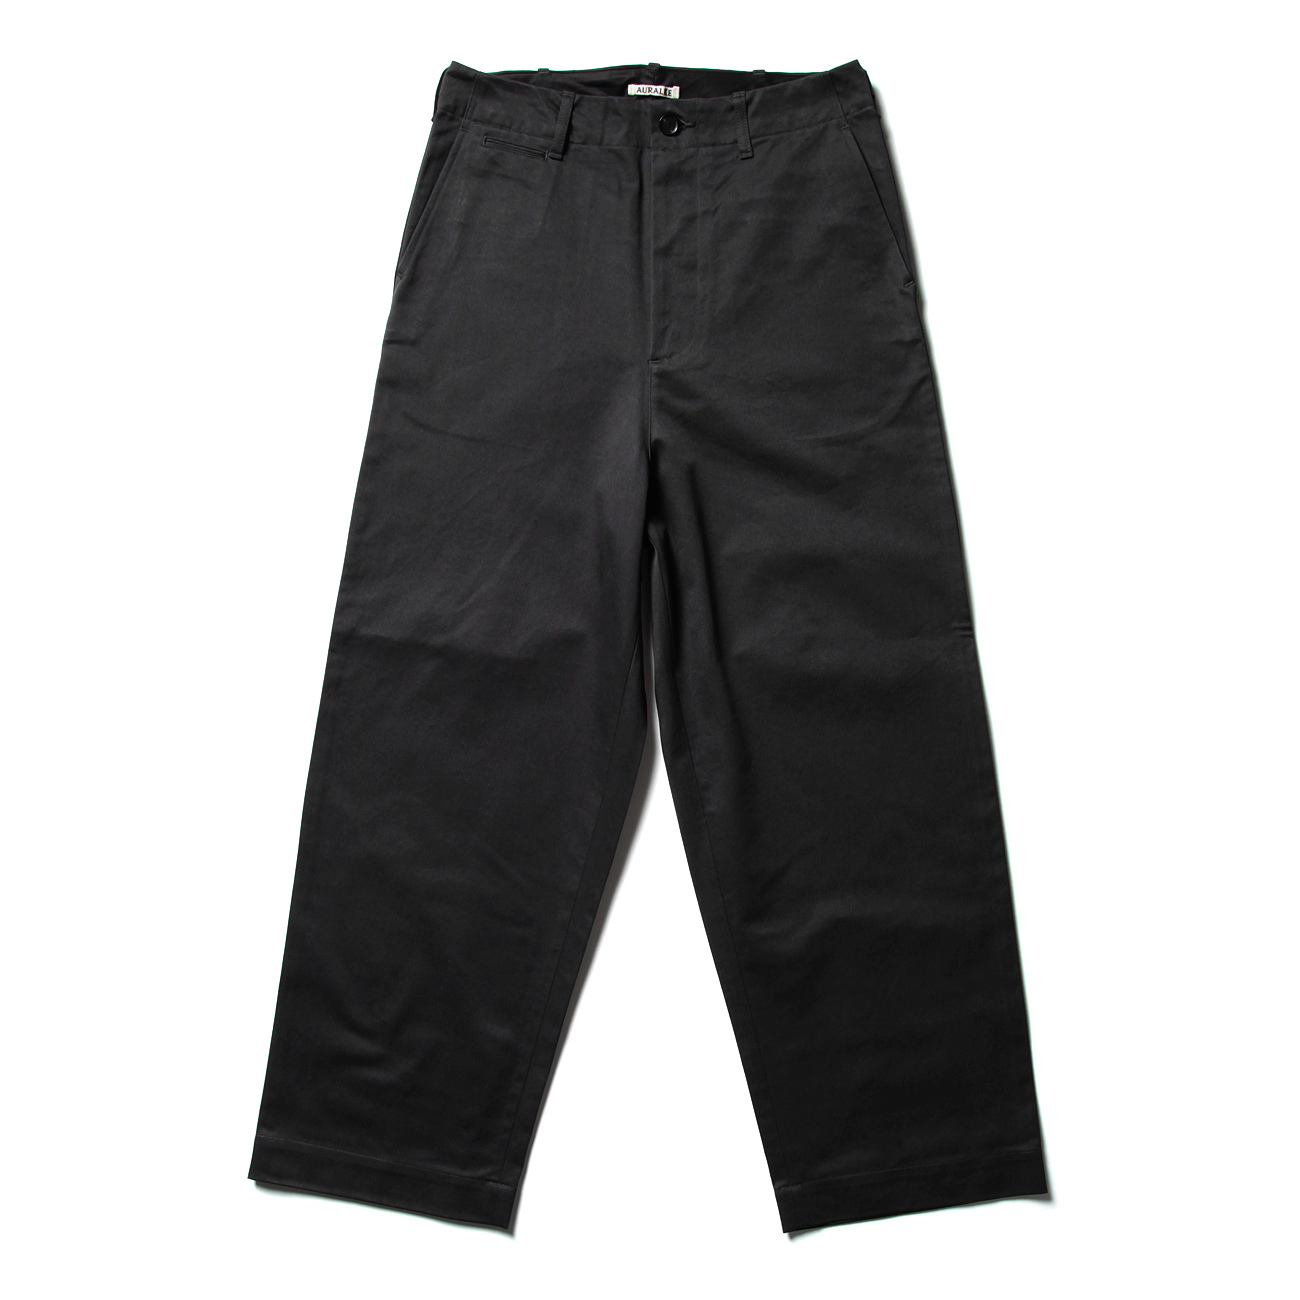 WASHED FINX CHINO WIDE PANTS (メンズ) - Ink Black